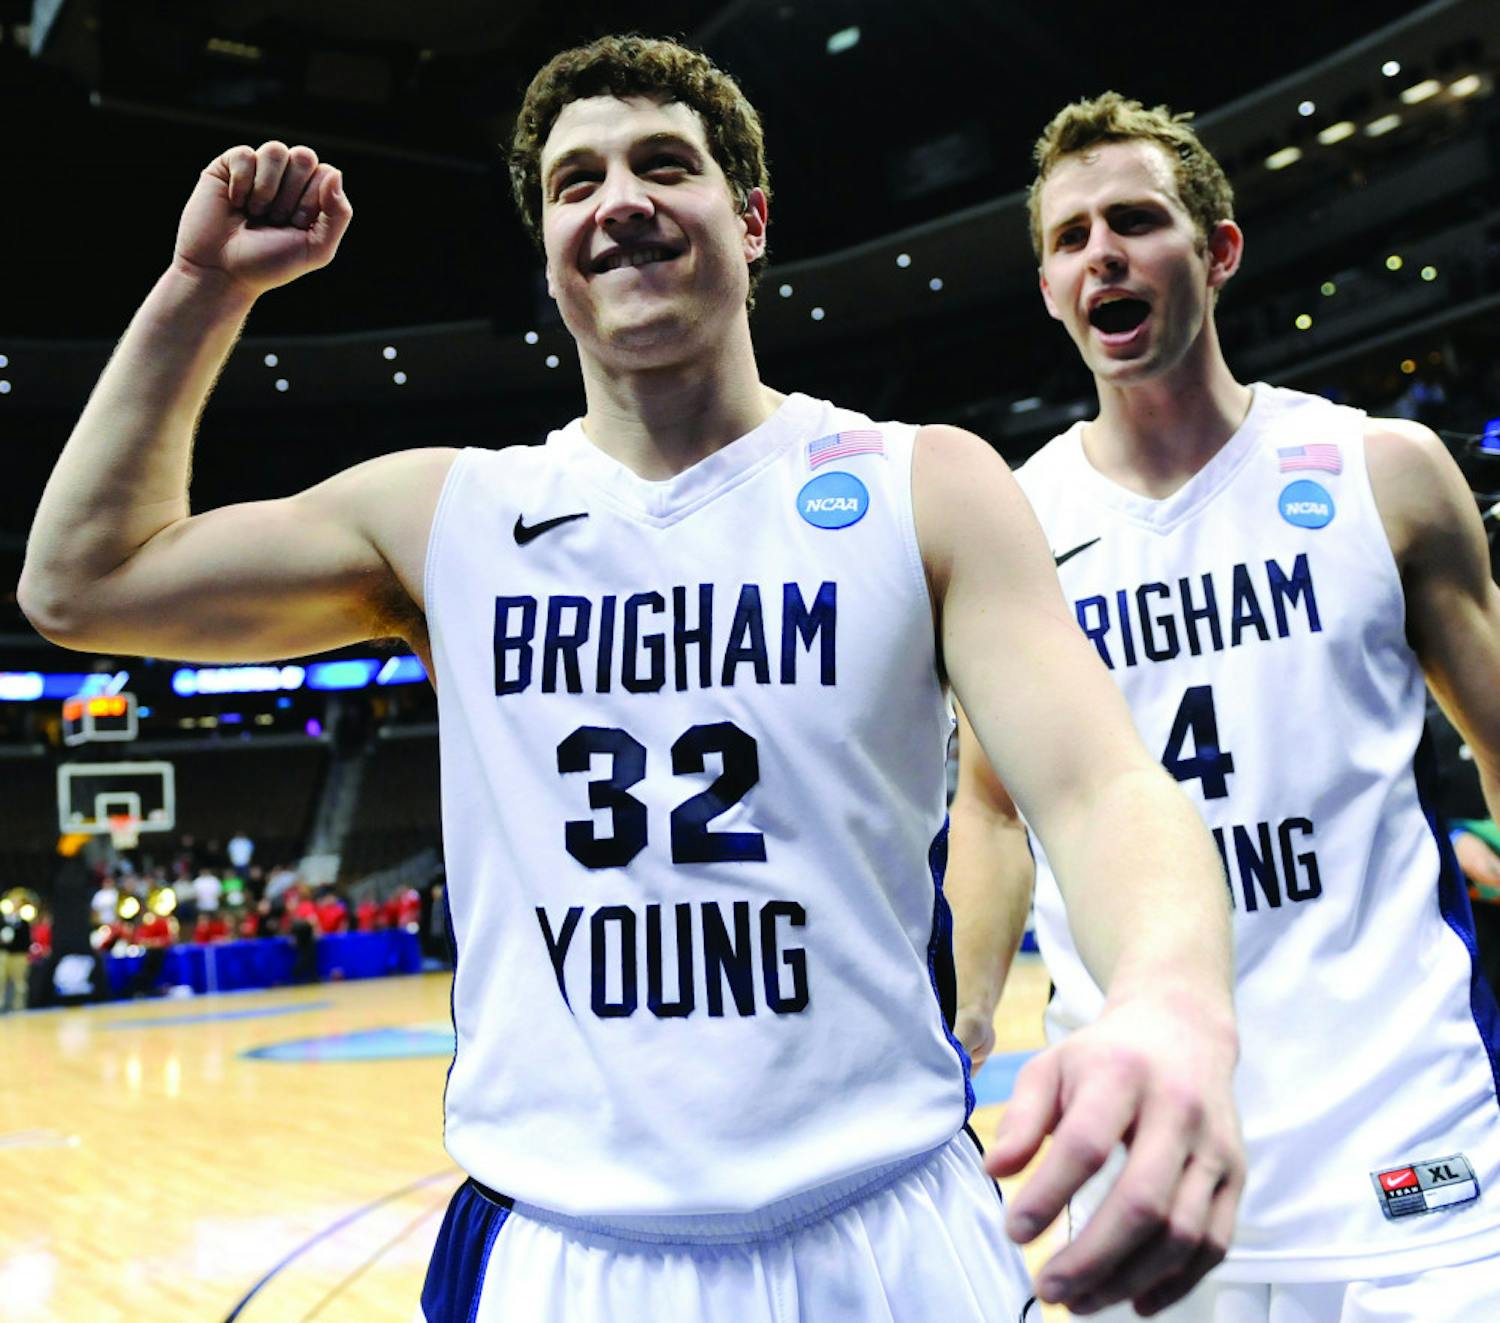 BYU guard Jimmer Fredette, left, will lead the Cougars into tonight’s Sweet 16 showdown against Florida in New Orleans. Fredette leads the nation in scoring with 28.8 points per game.